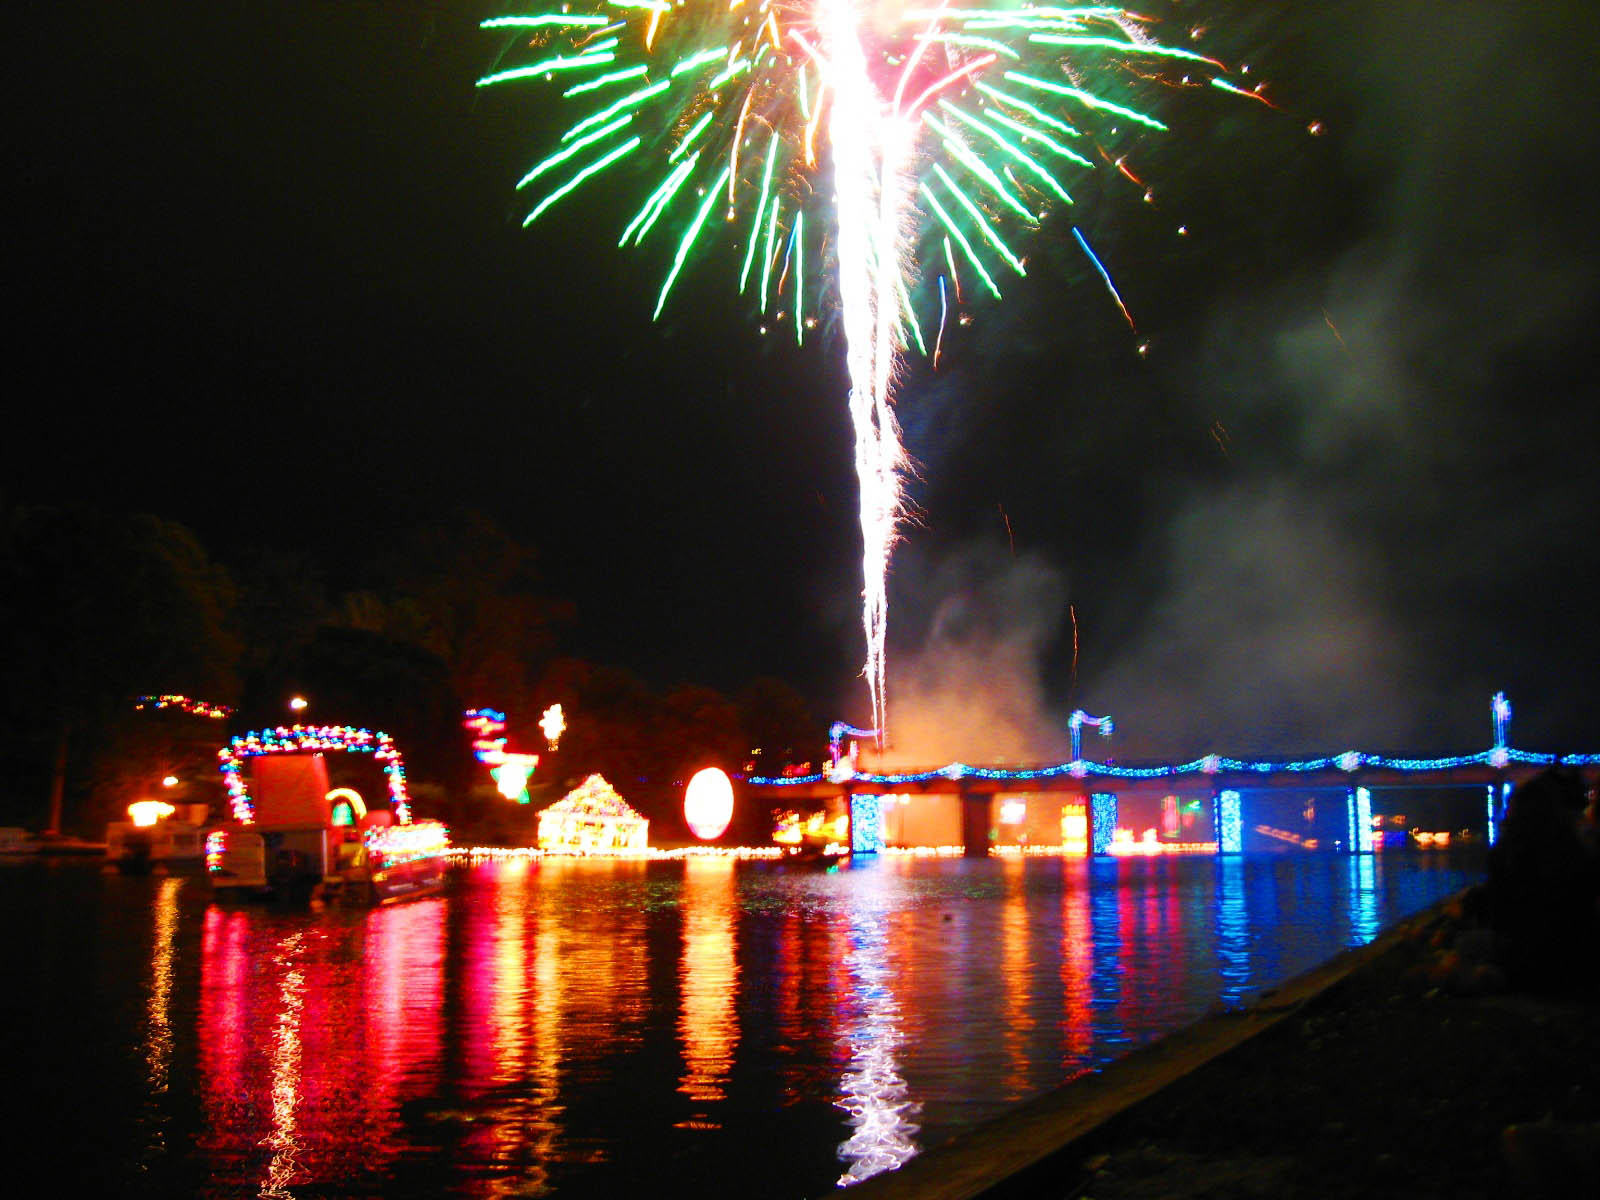 Natchitoches Christmas Lighting
 2013 Festival of Lights Schedule of Events The Premier